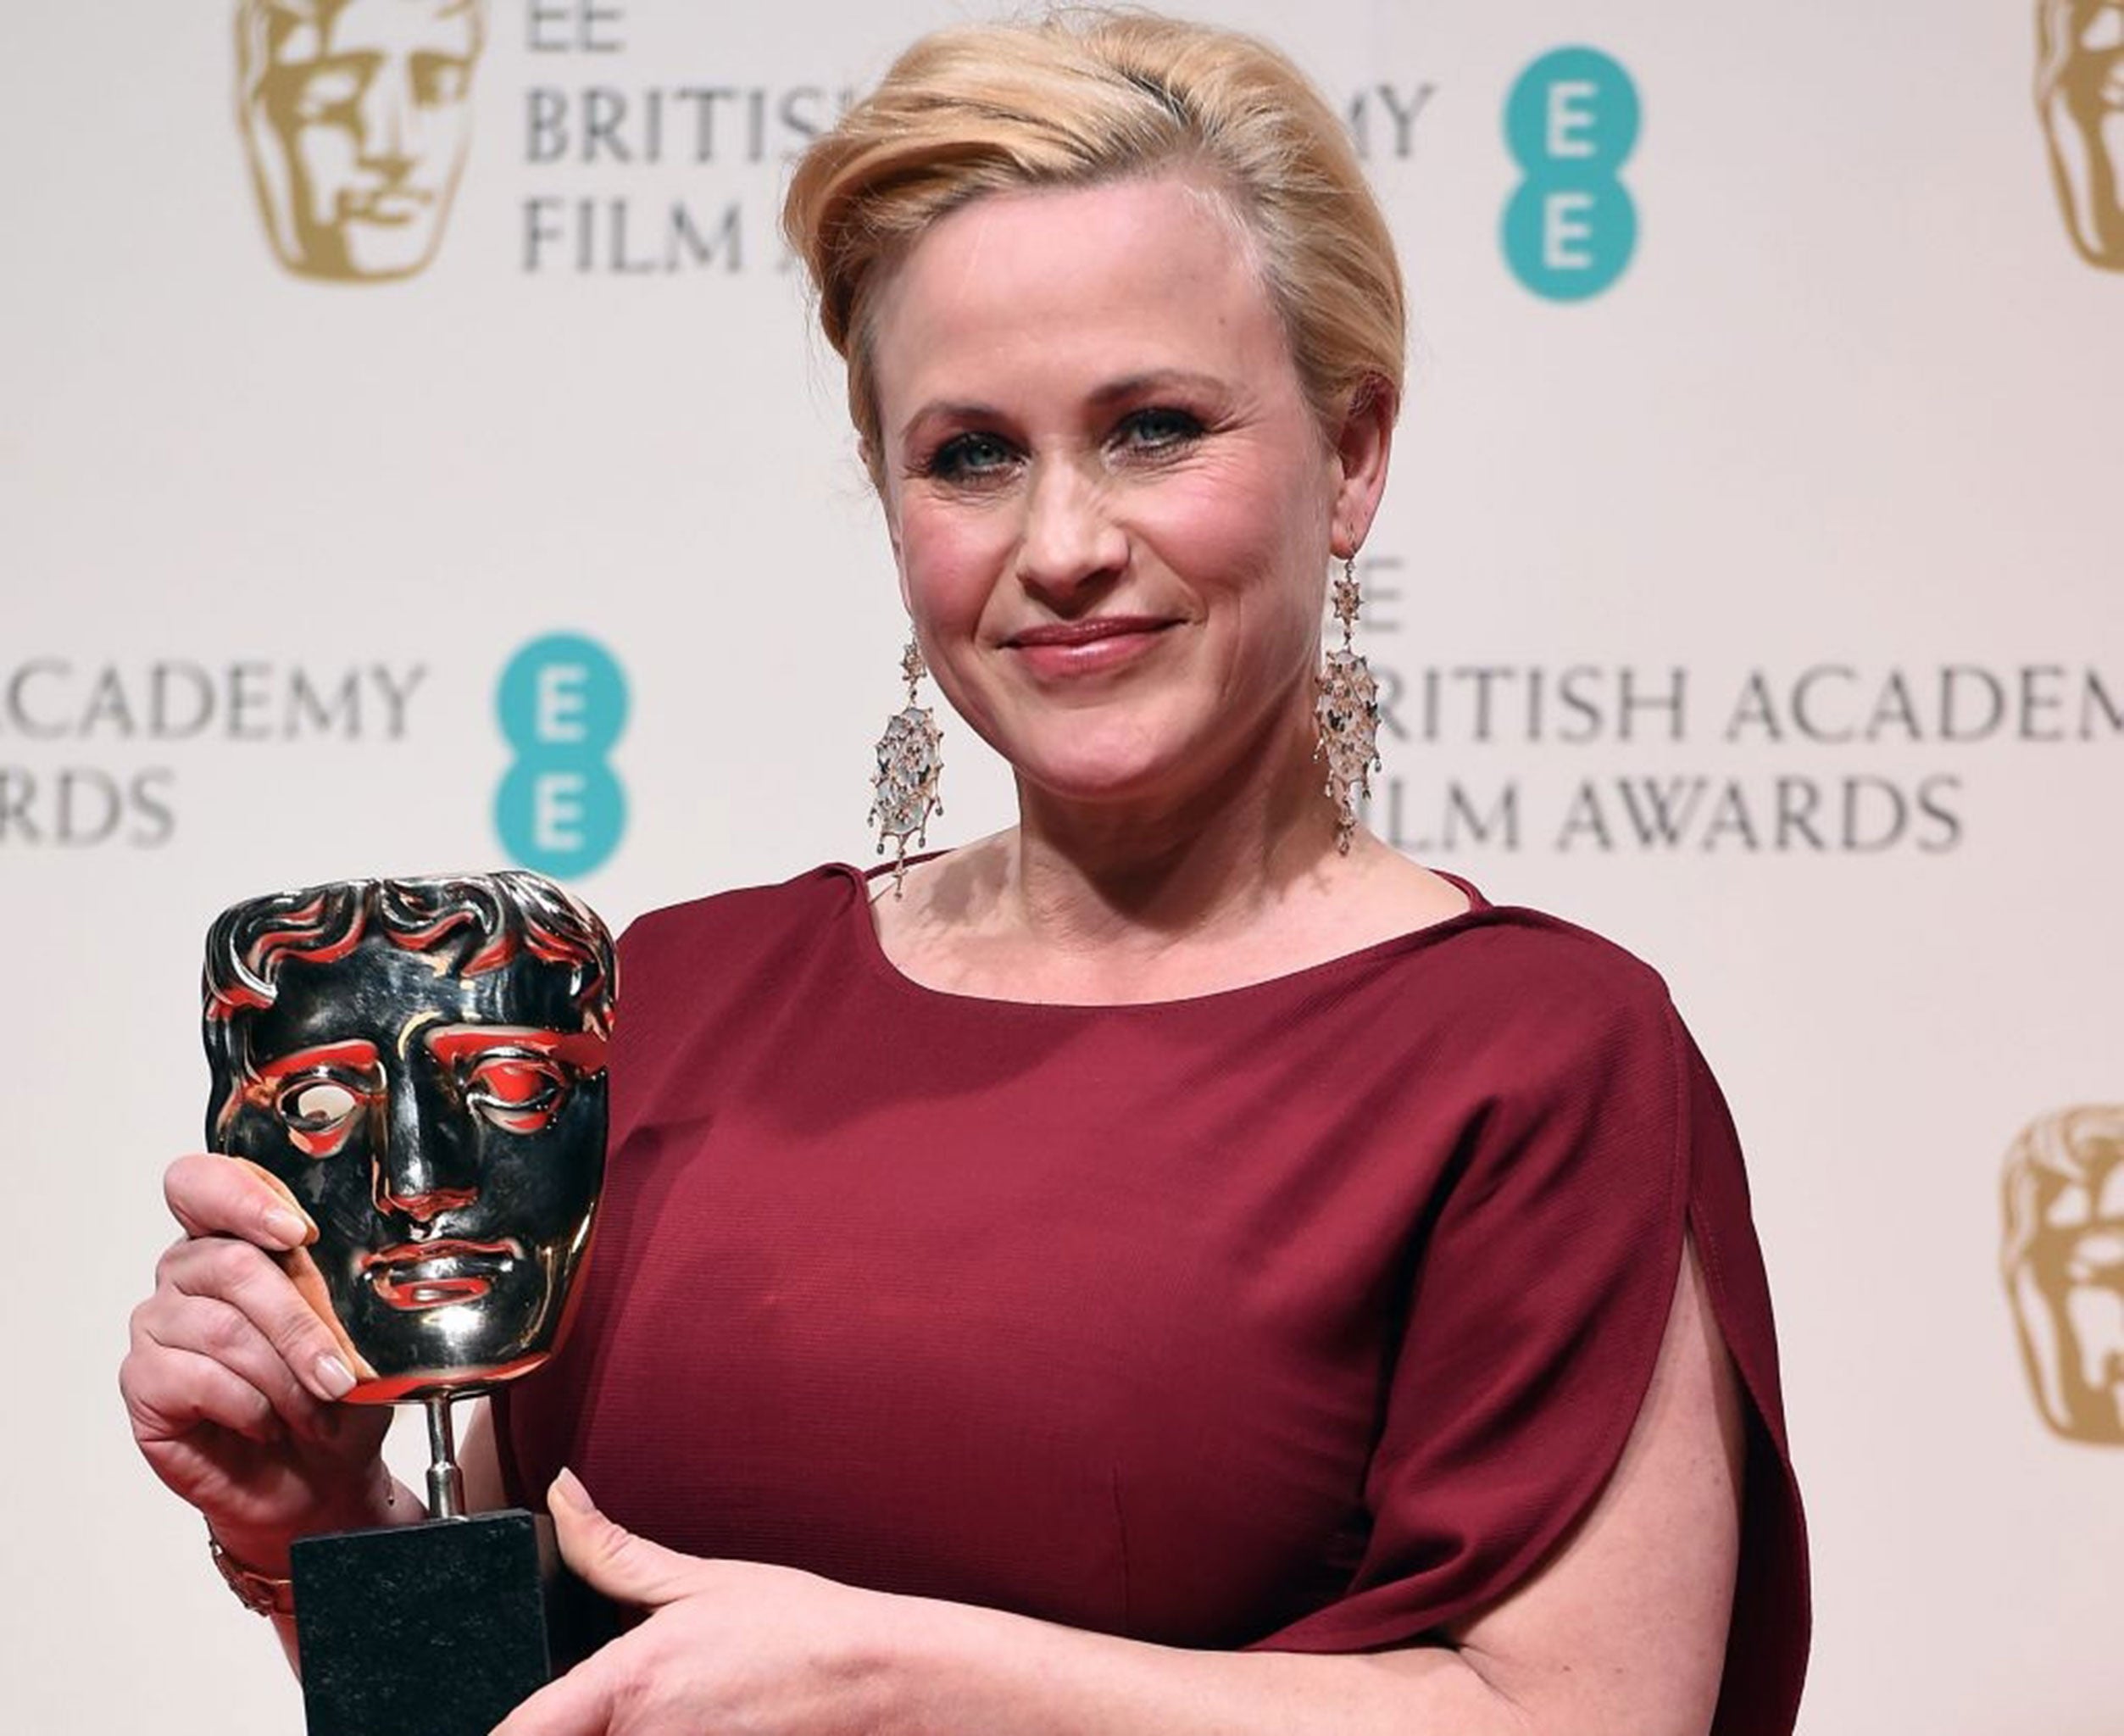 US actress Patricia Arquette poses in the press room after winning the Best Supporting Actress award for her performance in 'Boyhood' during the BAFTAs